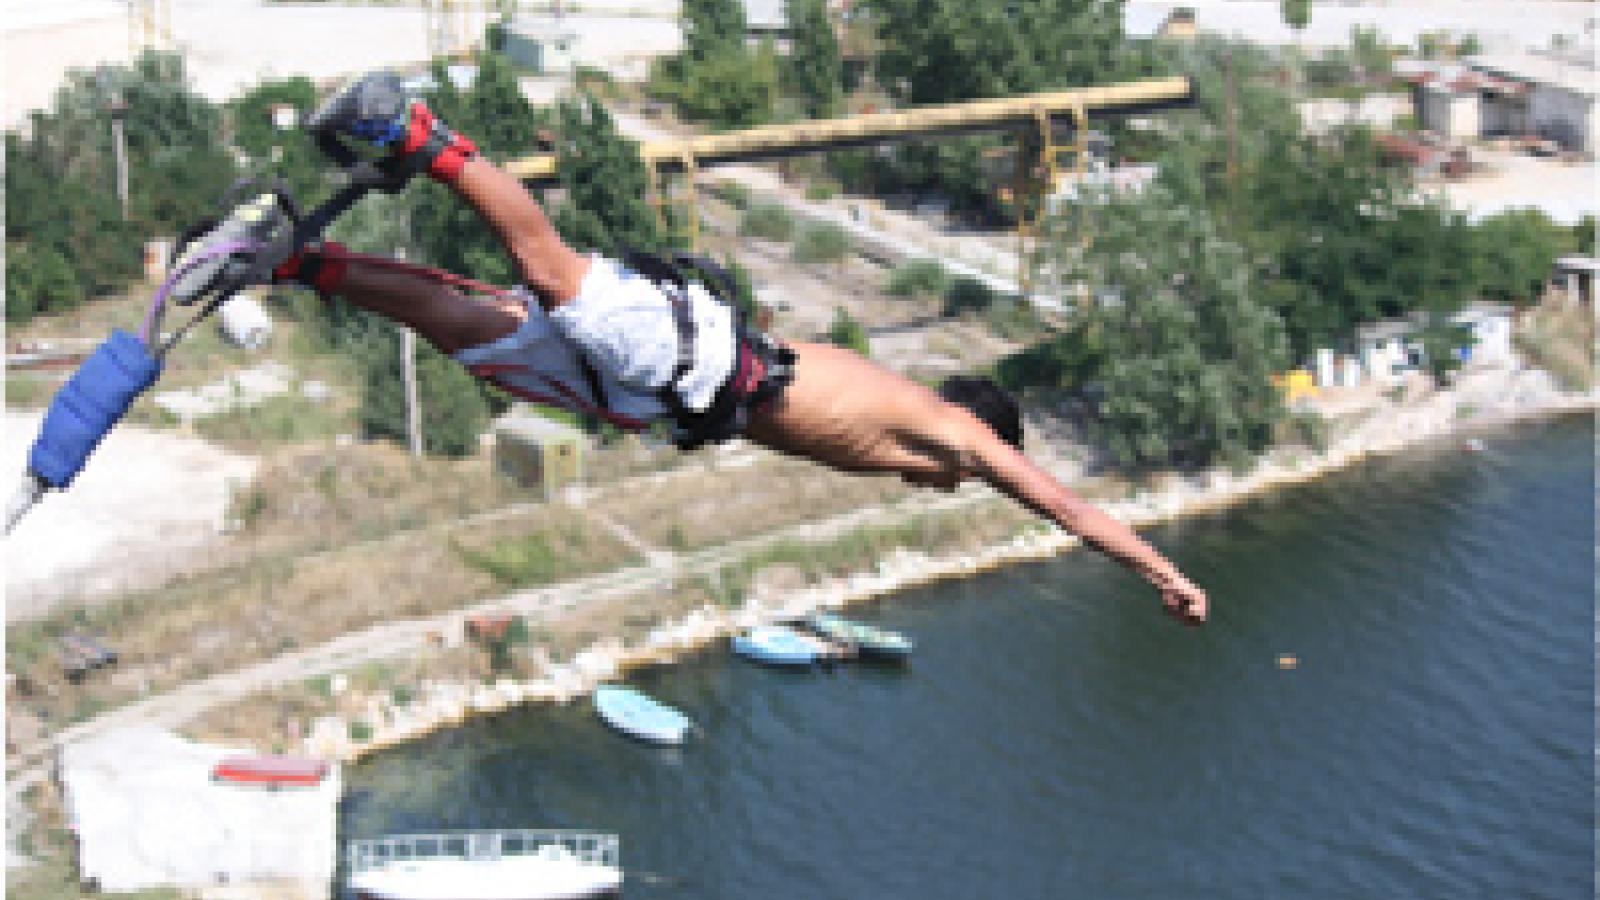 Adam got a chance to try bungee jumping while in Varna, Bulgaria.